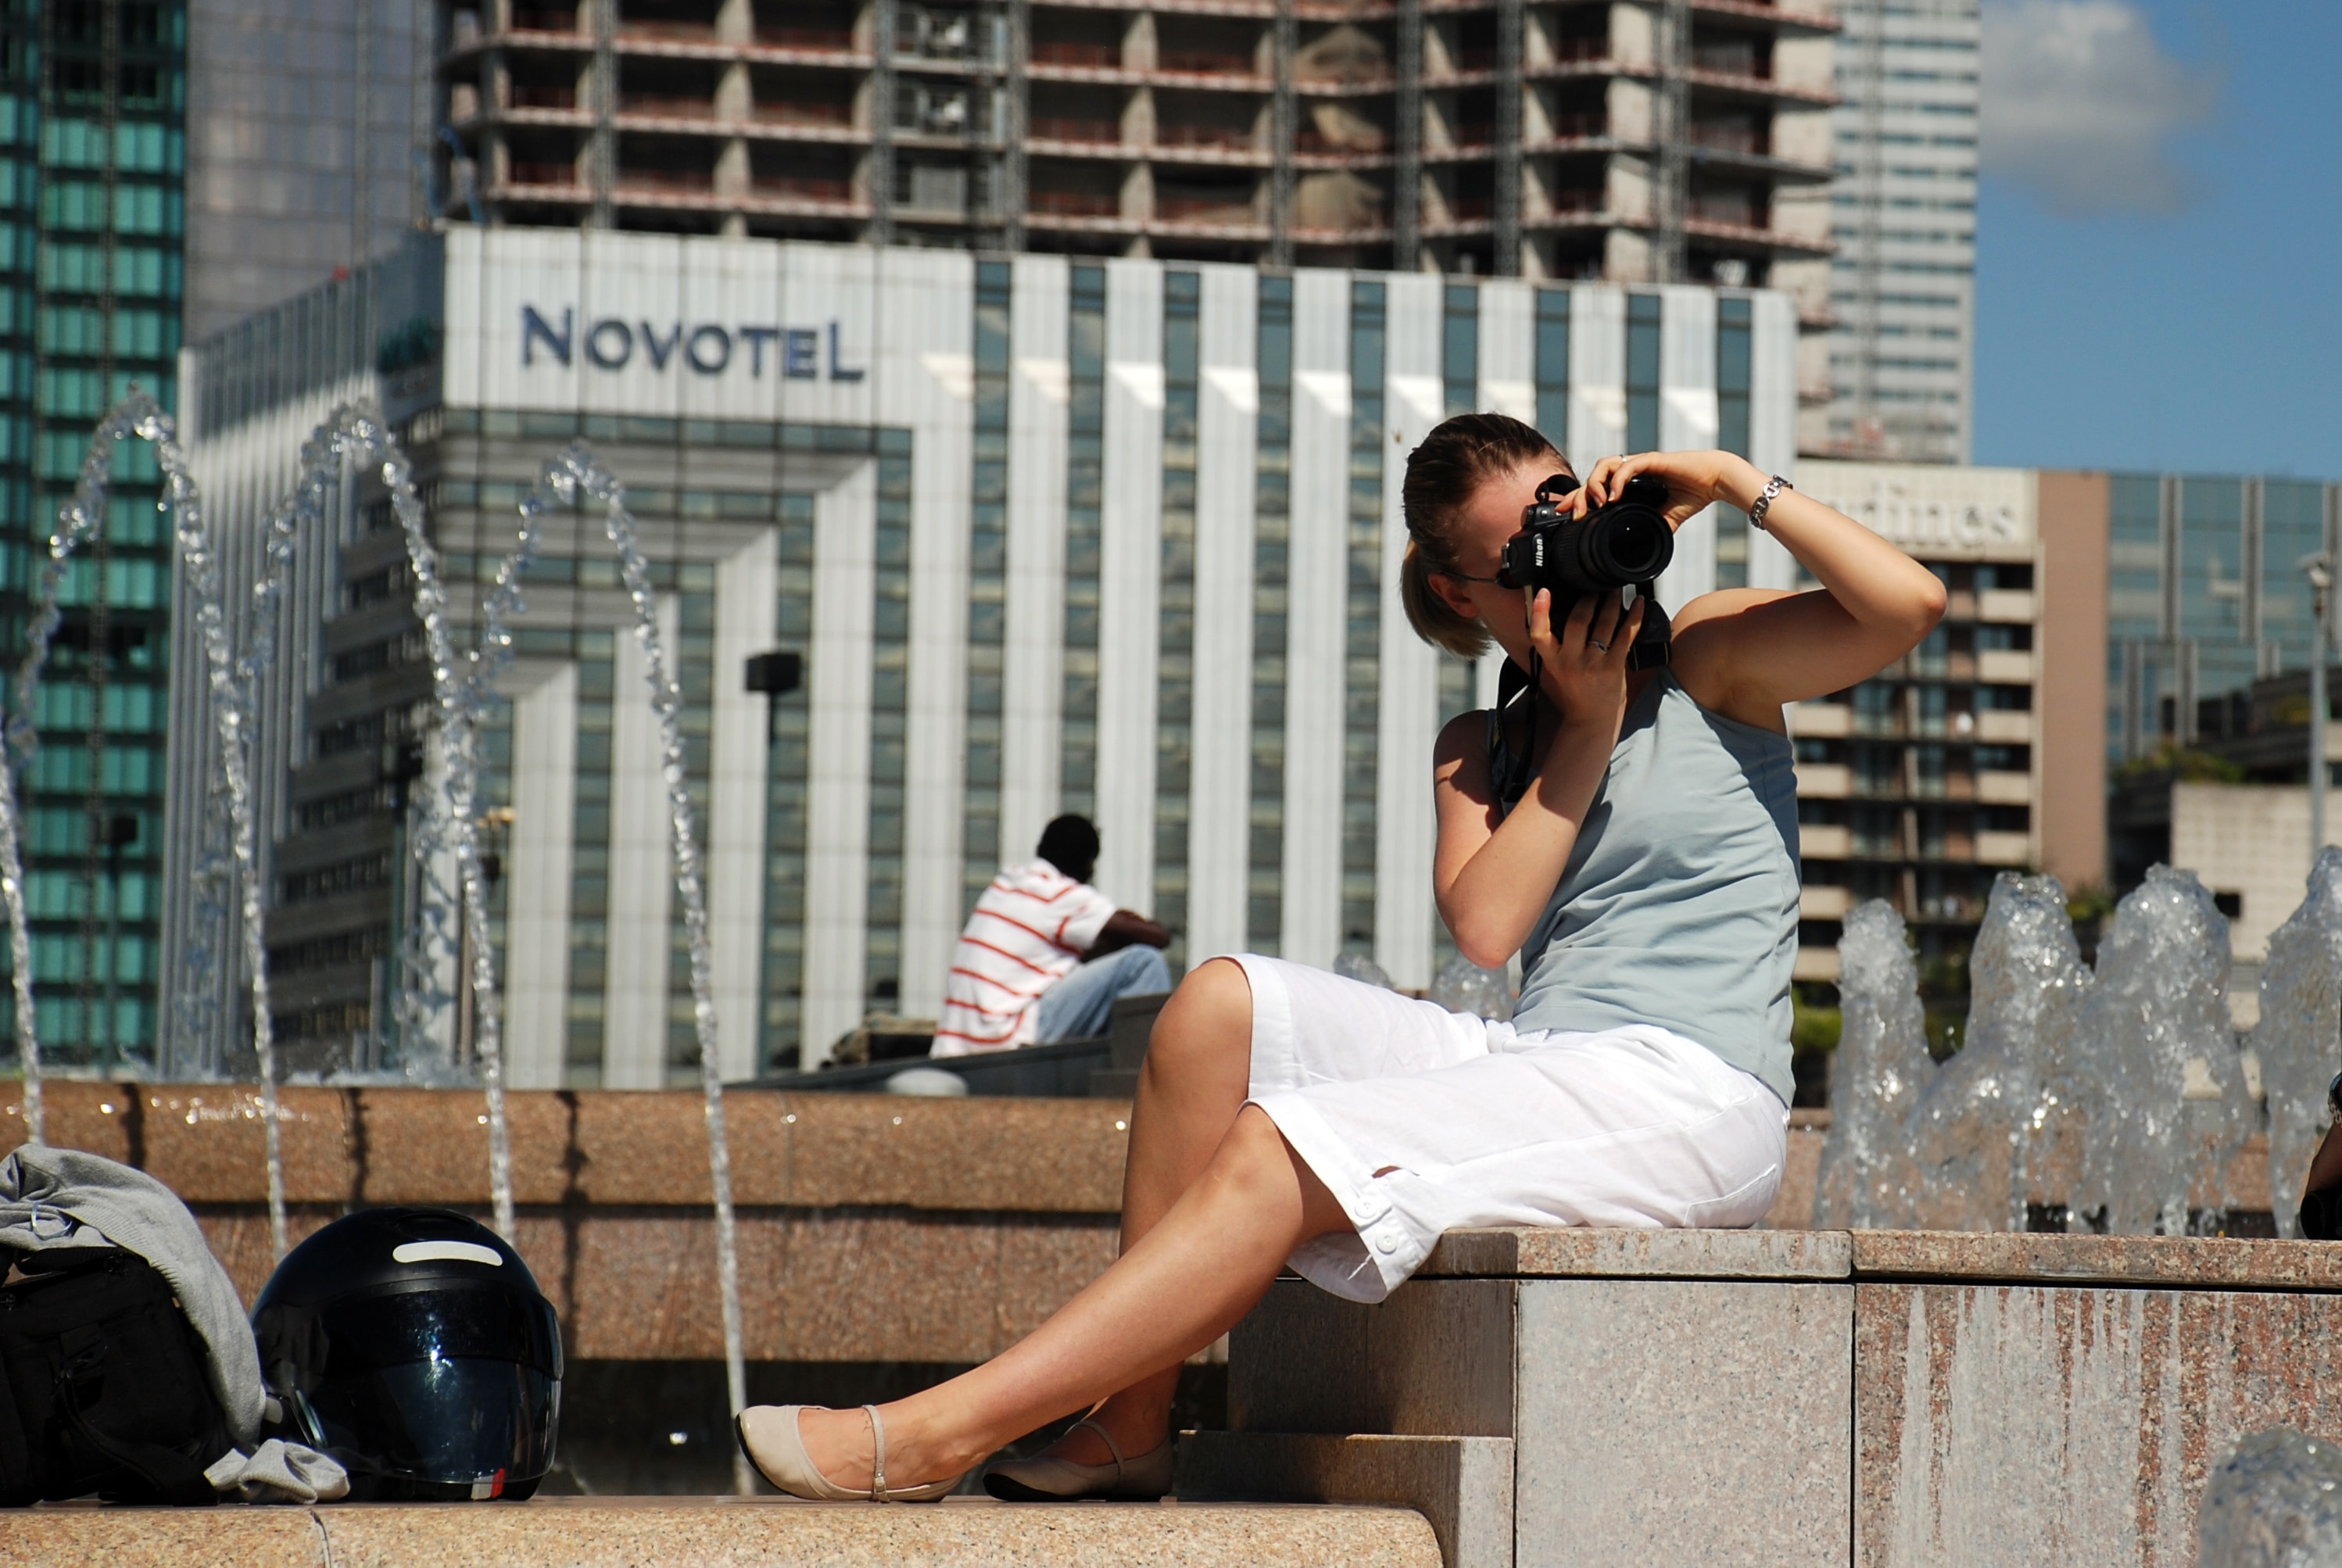 Woman taking a photo in front of Novotel Hotel